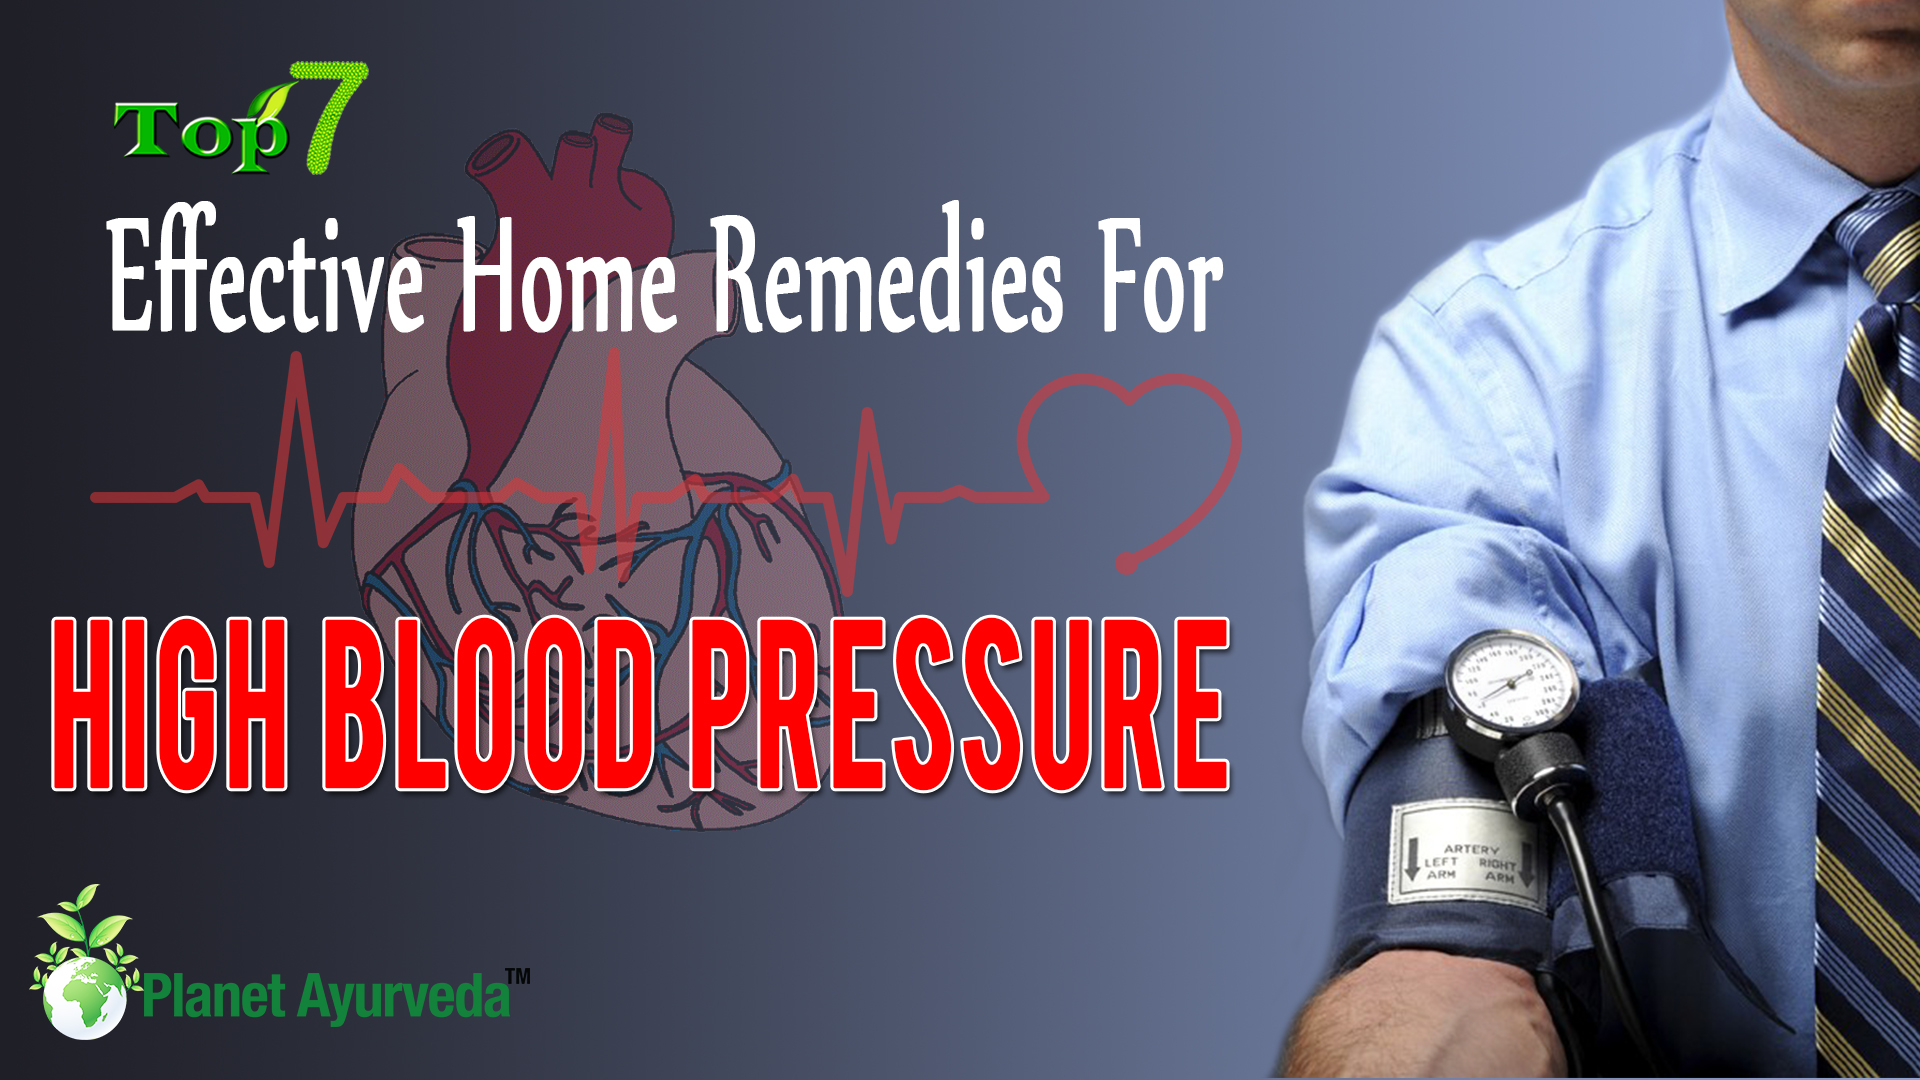 Top 7 Effective Home Remedies For High Blood Pressure